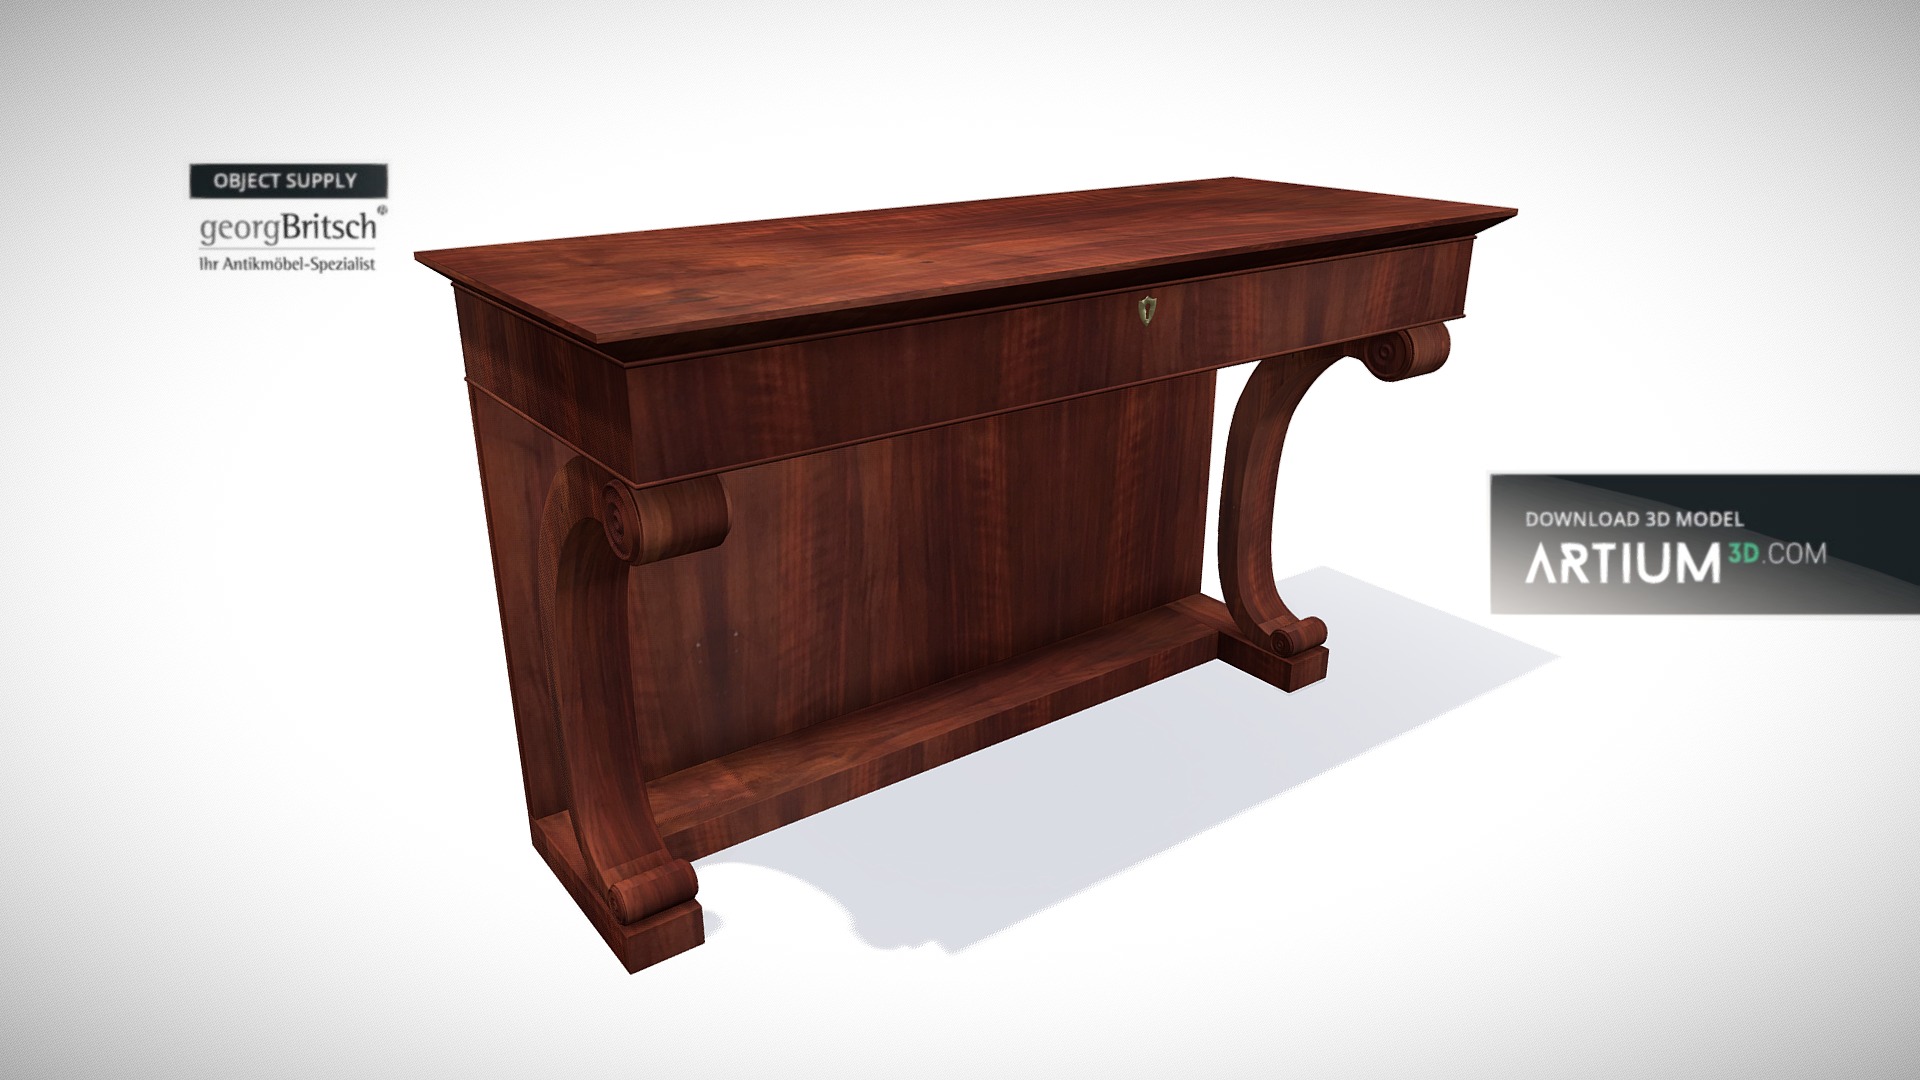 3D model Biedermeier console table – Georg Britsch - This is a 3D model of the Biedermeier console table - Georg Britsch. The 3D model is about a wooden table with a white background.